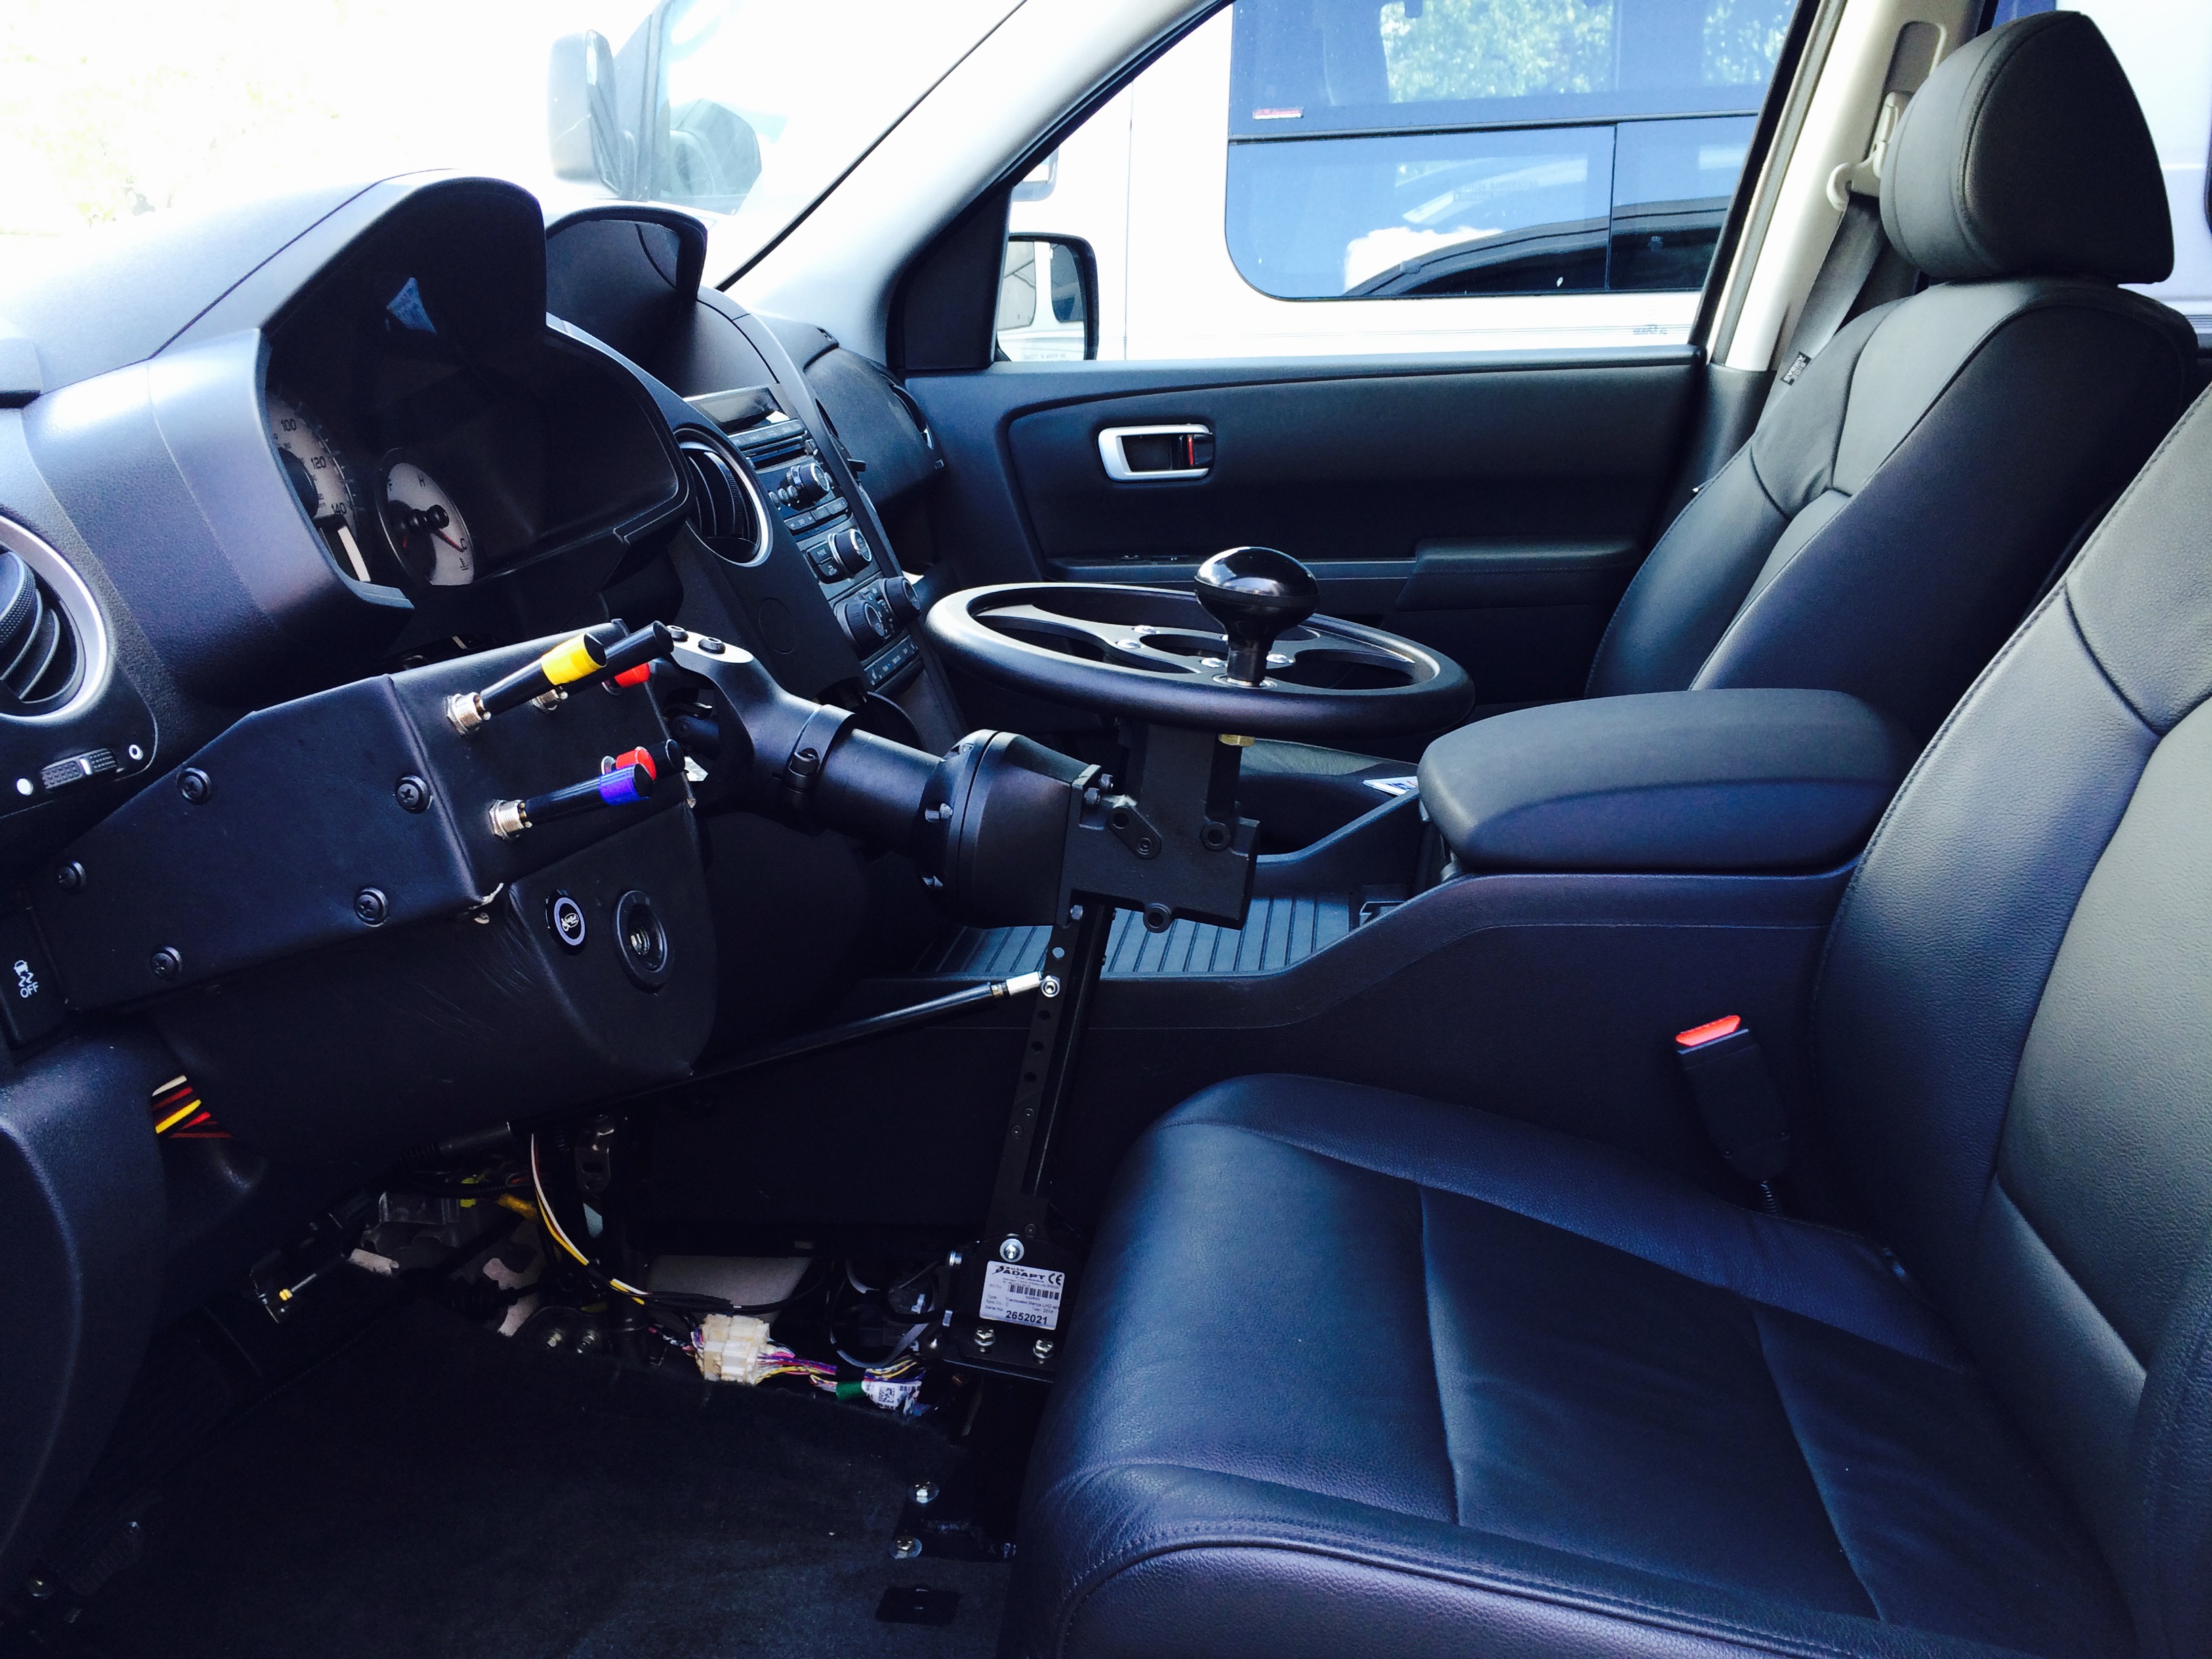 ColleBuilt Helps Disabled Drivers Take the Wheel with Right Angle Gearboxes